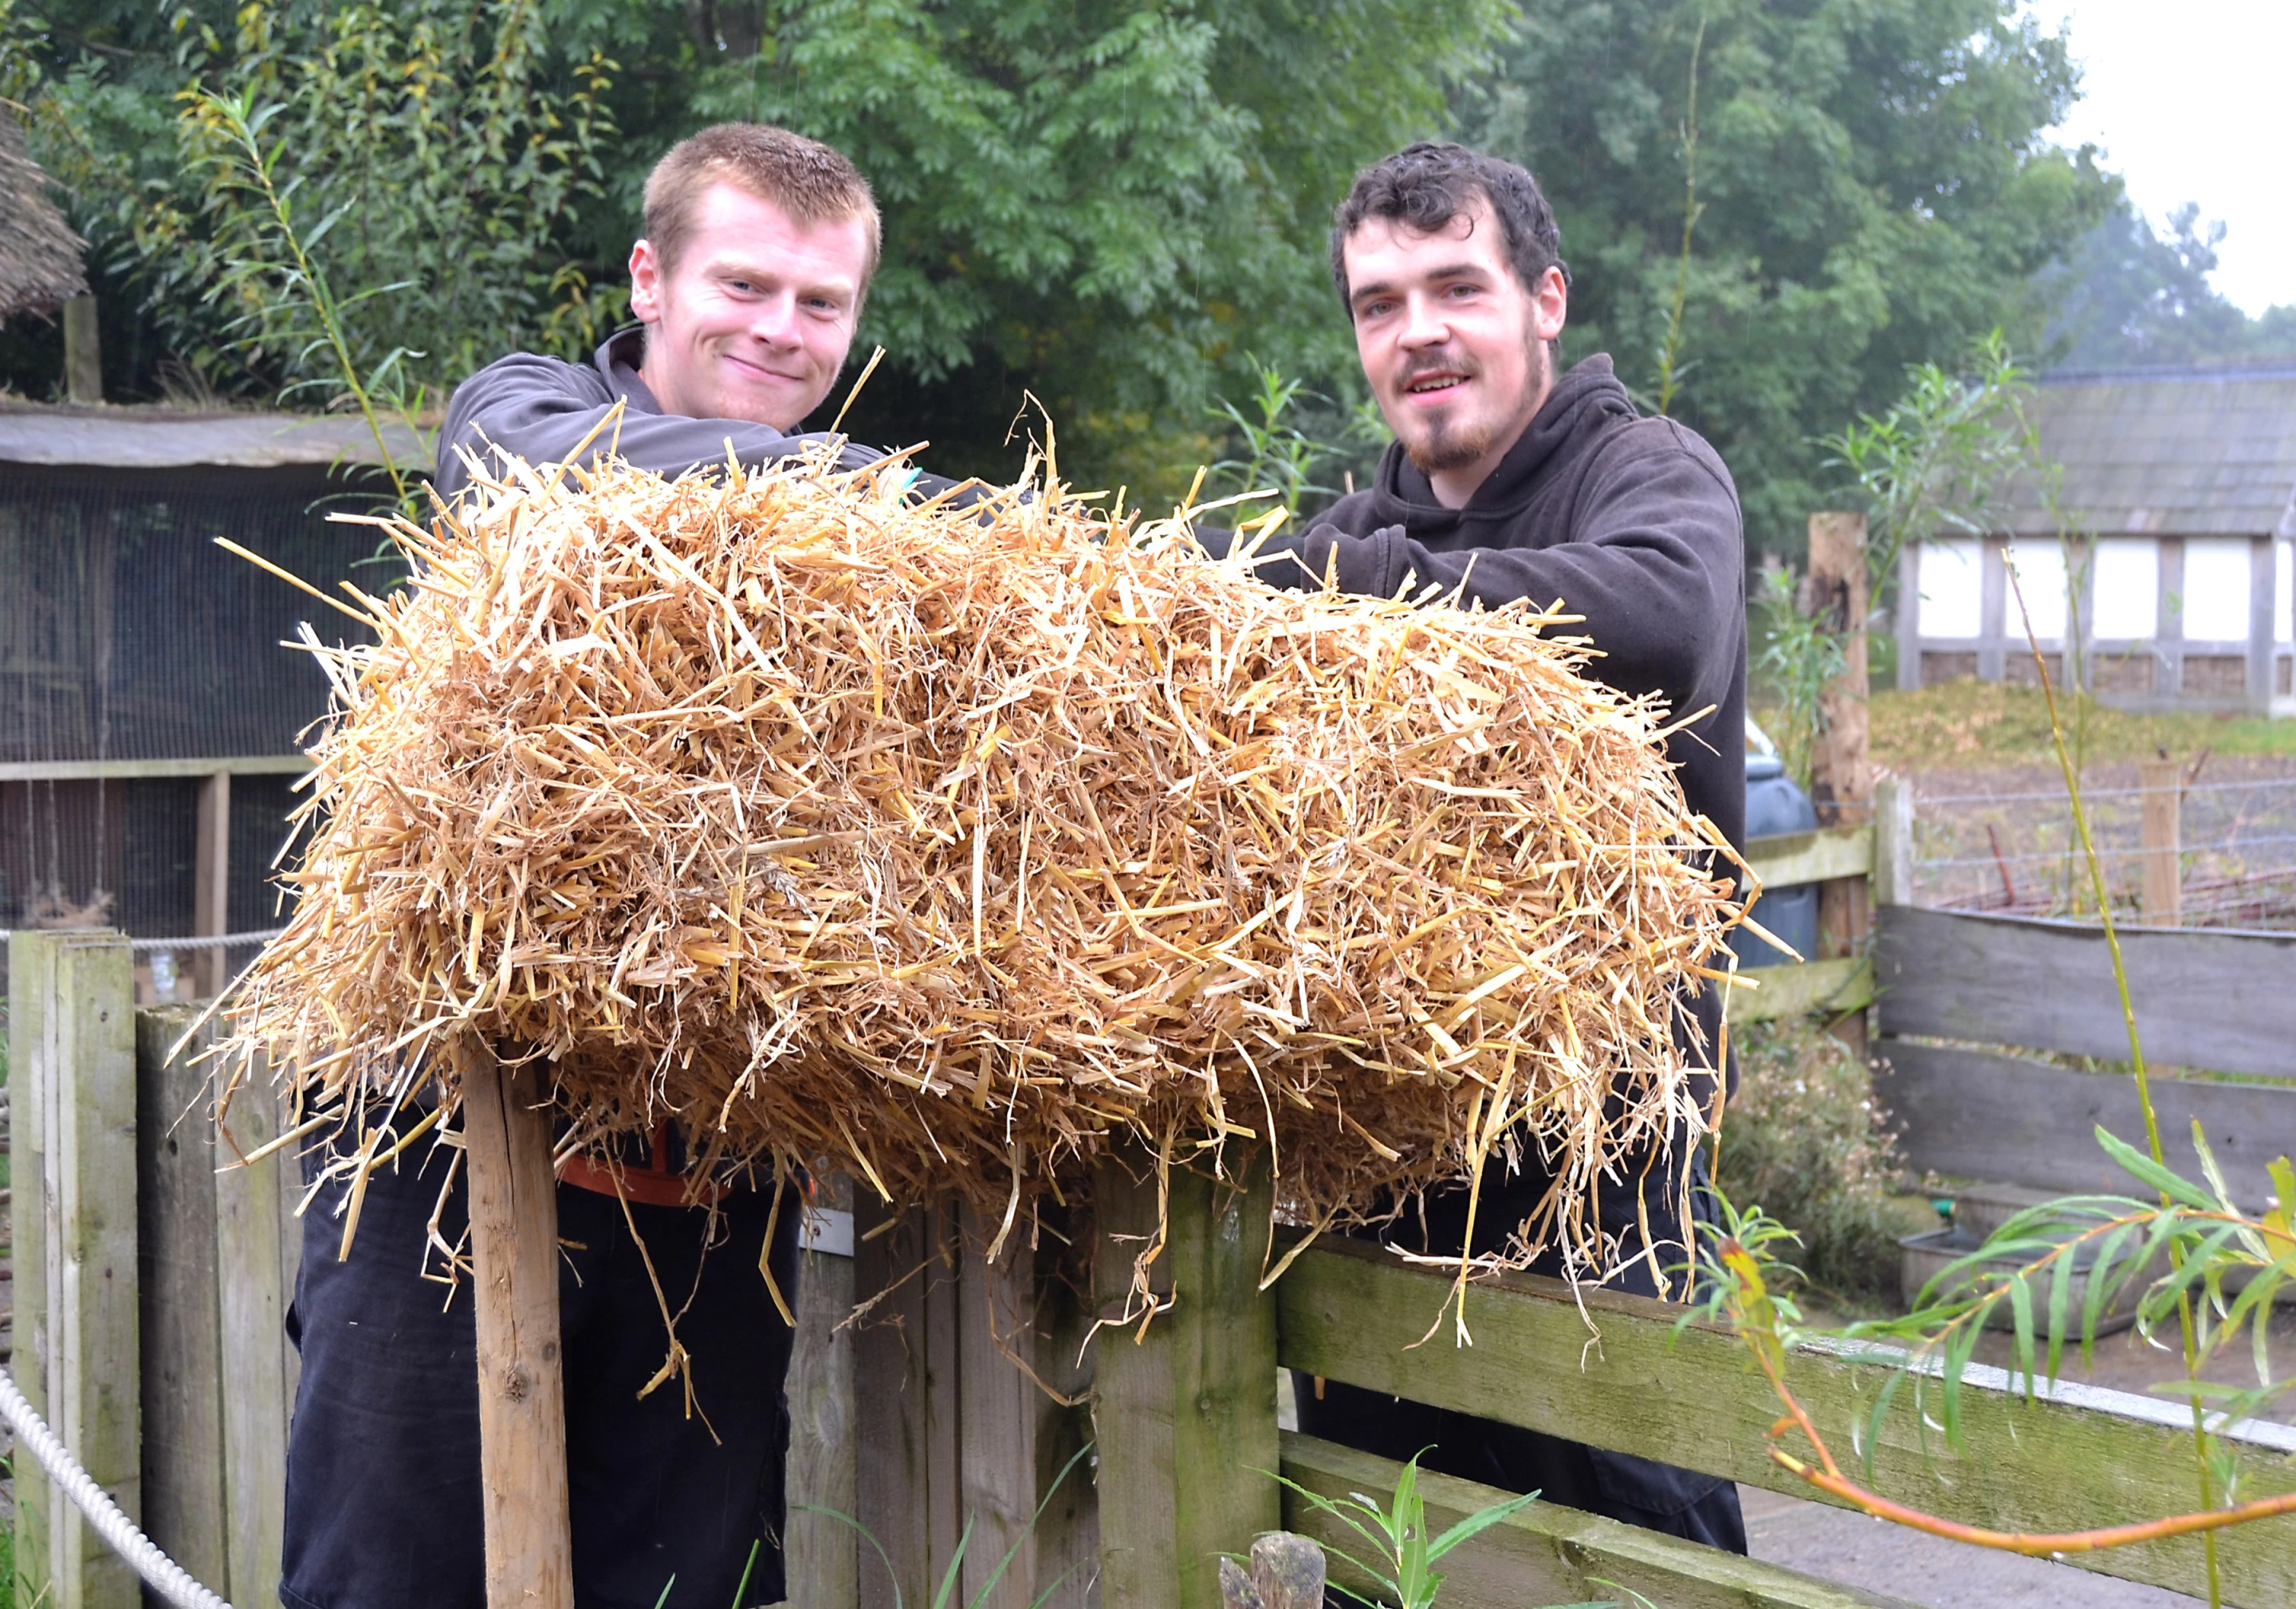 Ben Sisterson and Ben Hardingham working at Jarrow Hall Anglo-Saxon Farm, Village and Bede Museum